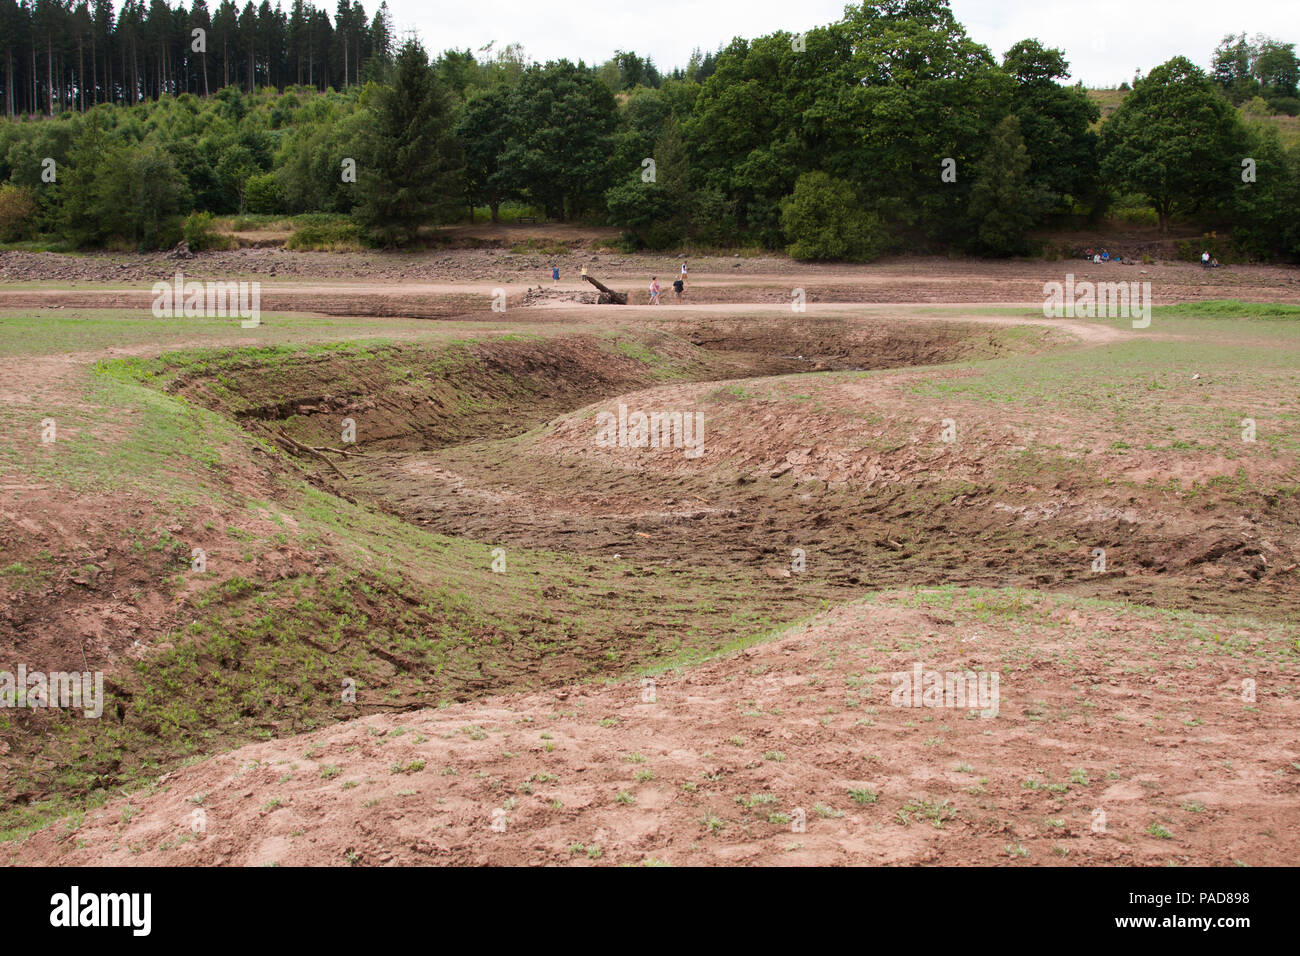 Llwyn Onn reservoir, Merthyr Tydfil, South Wales,  UK.  22 July 2018.  UK weather: The heatwave has caused this reservoir to become severely depleted, with the water line well below normal.  A stream that runs into the reservoir has dried up.  Credit: Andrew Bartlett/Alamy Live News Stock Photo